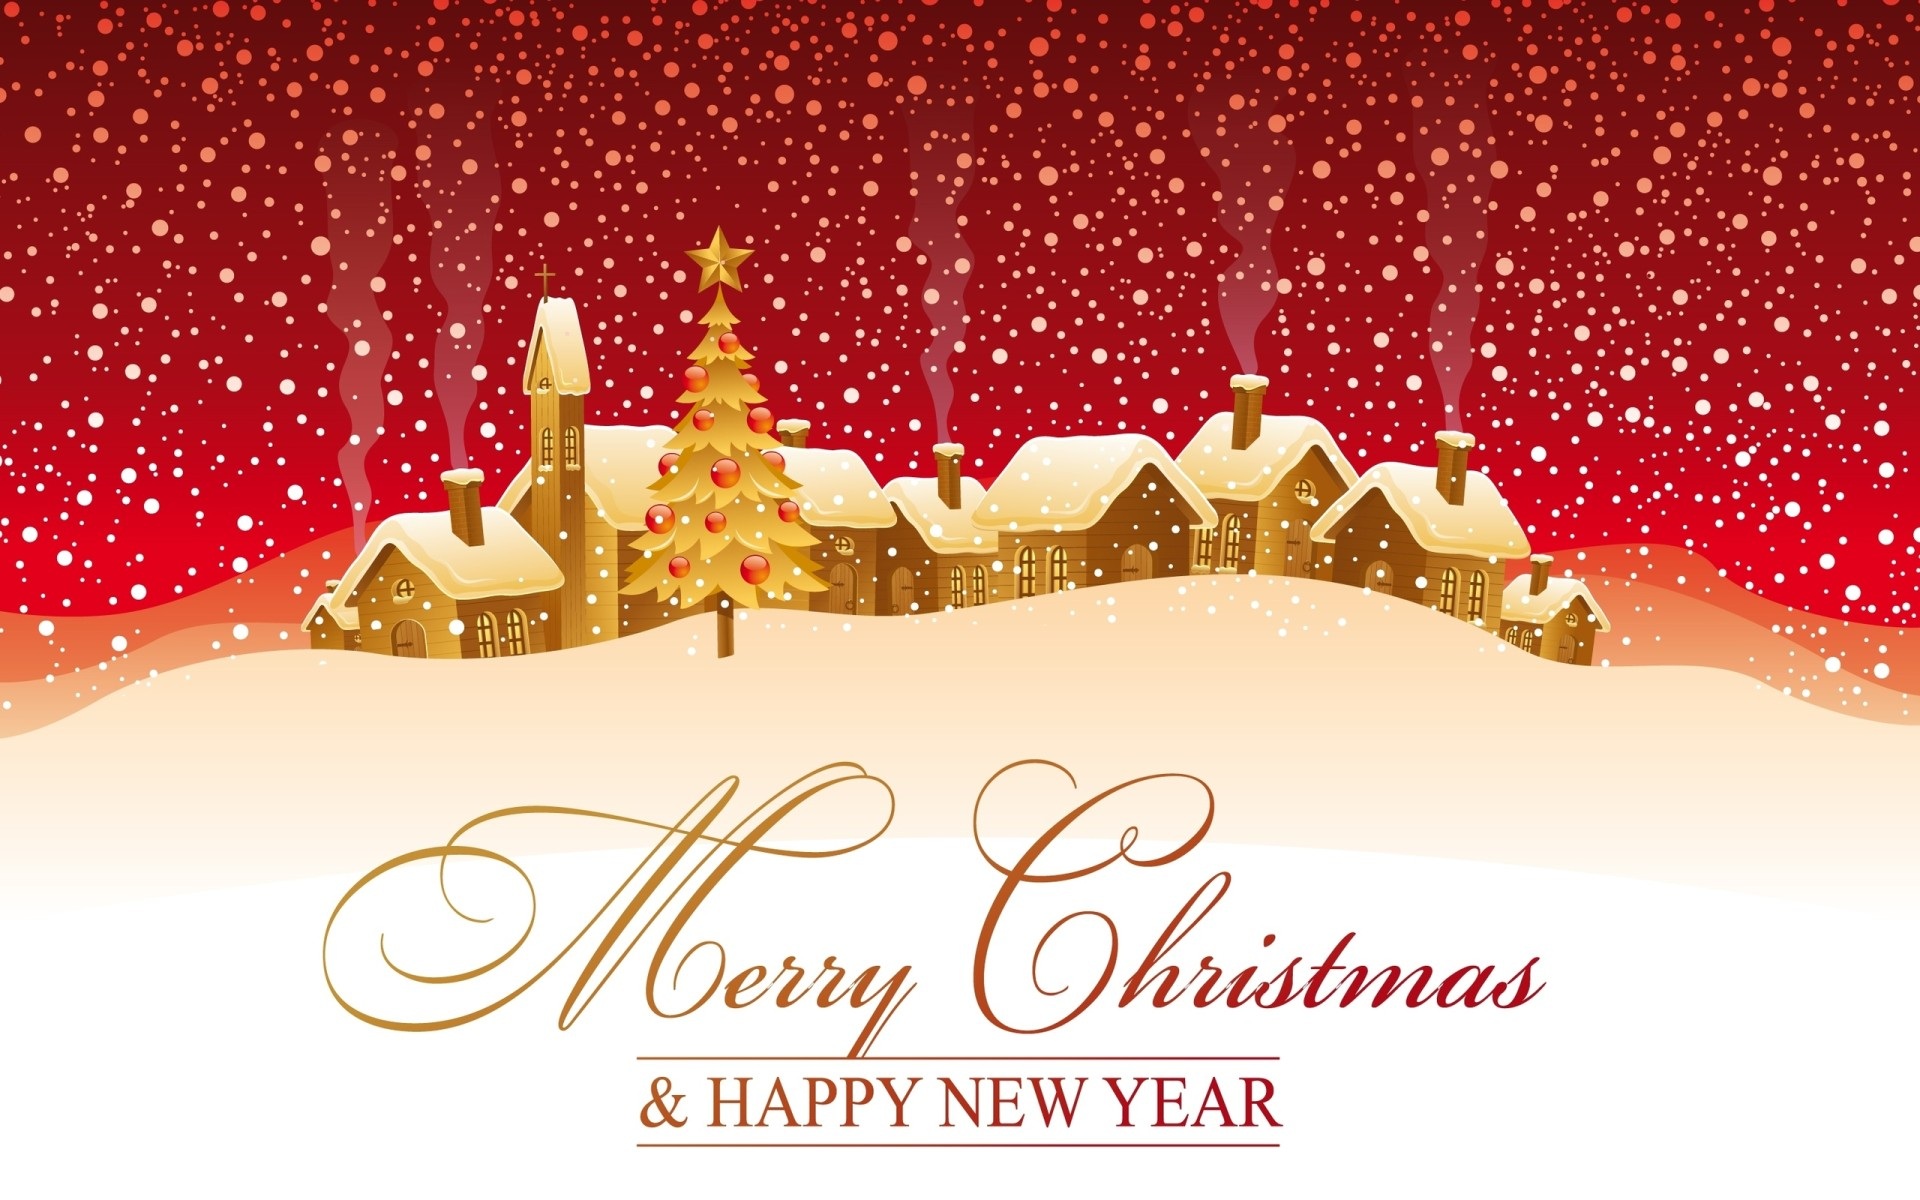 Merry Christmas And Happy New Year 2014!!